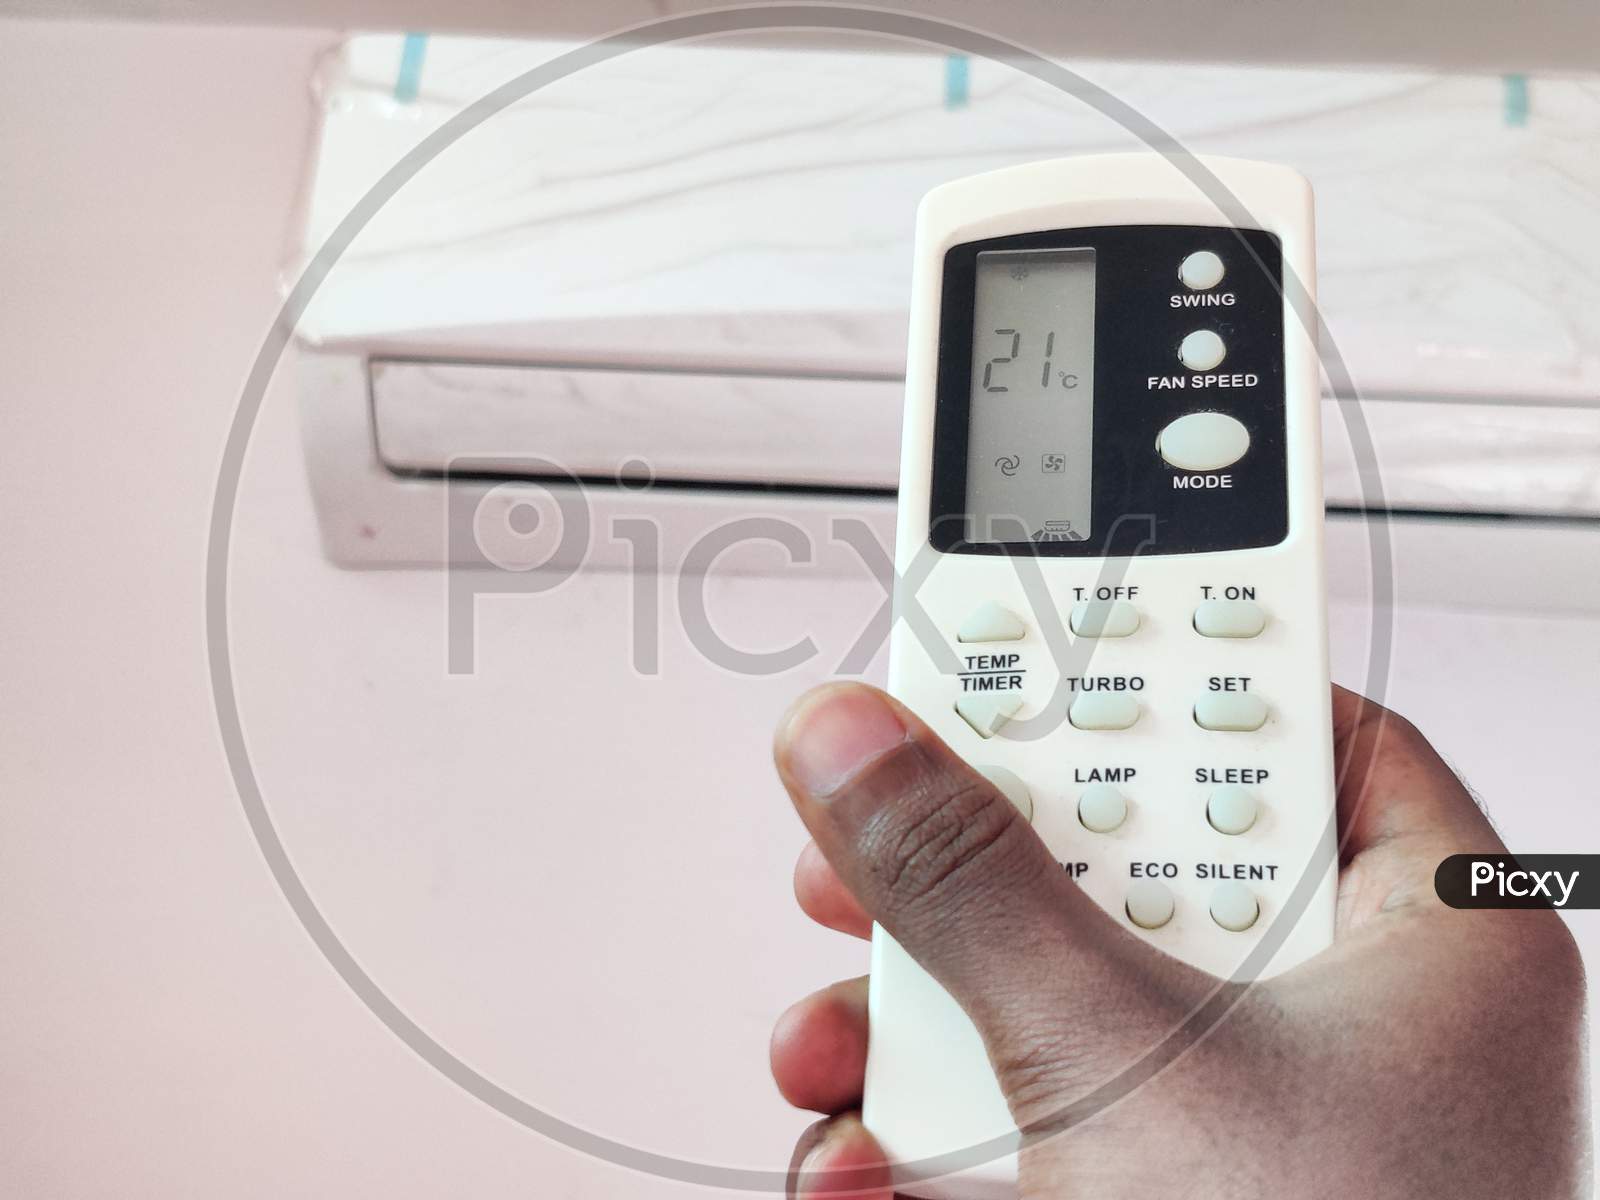 Indian Man Adjusting Temperature Of Air Conditioner By Remote In Room. Setting 21°C Temperature.